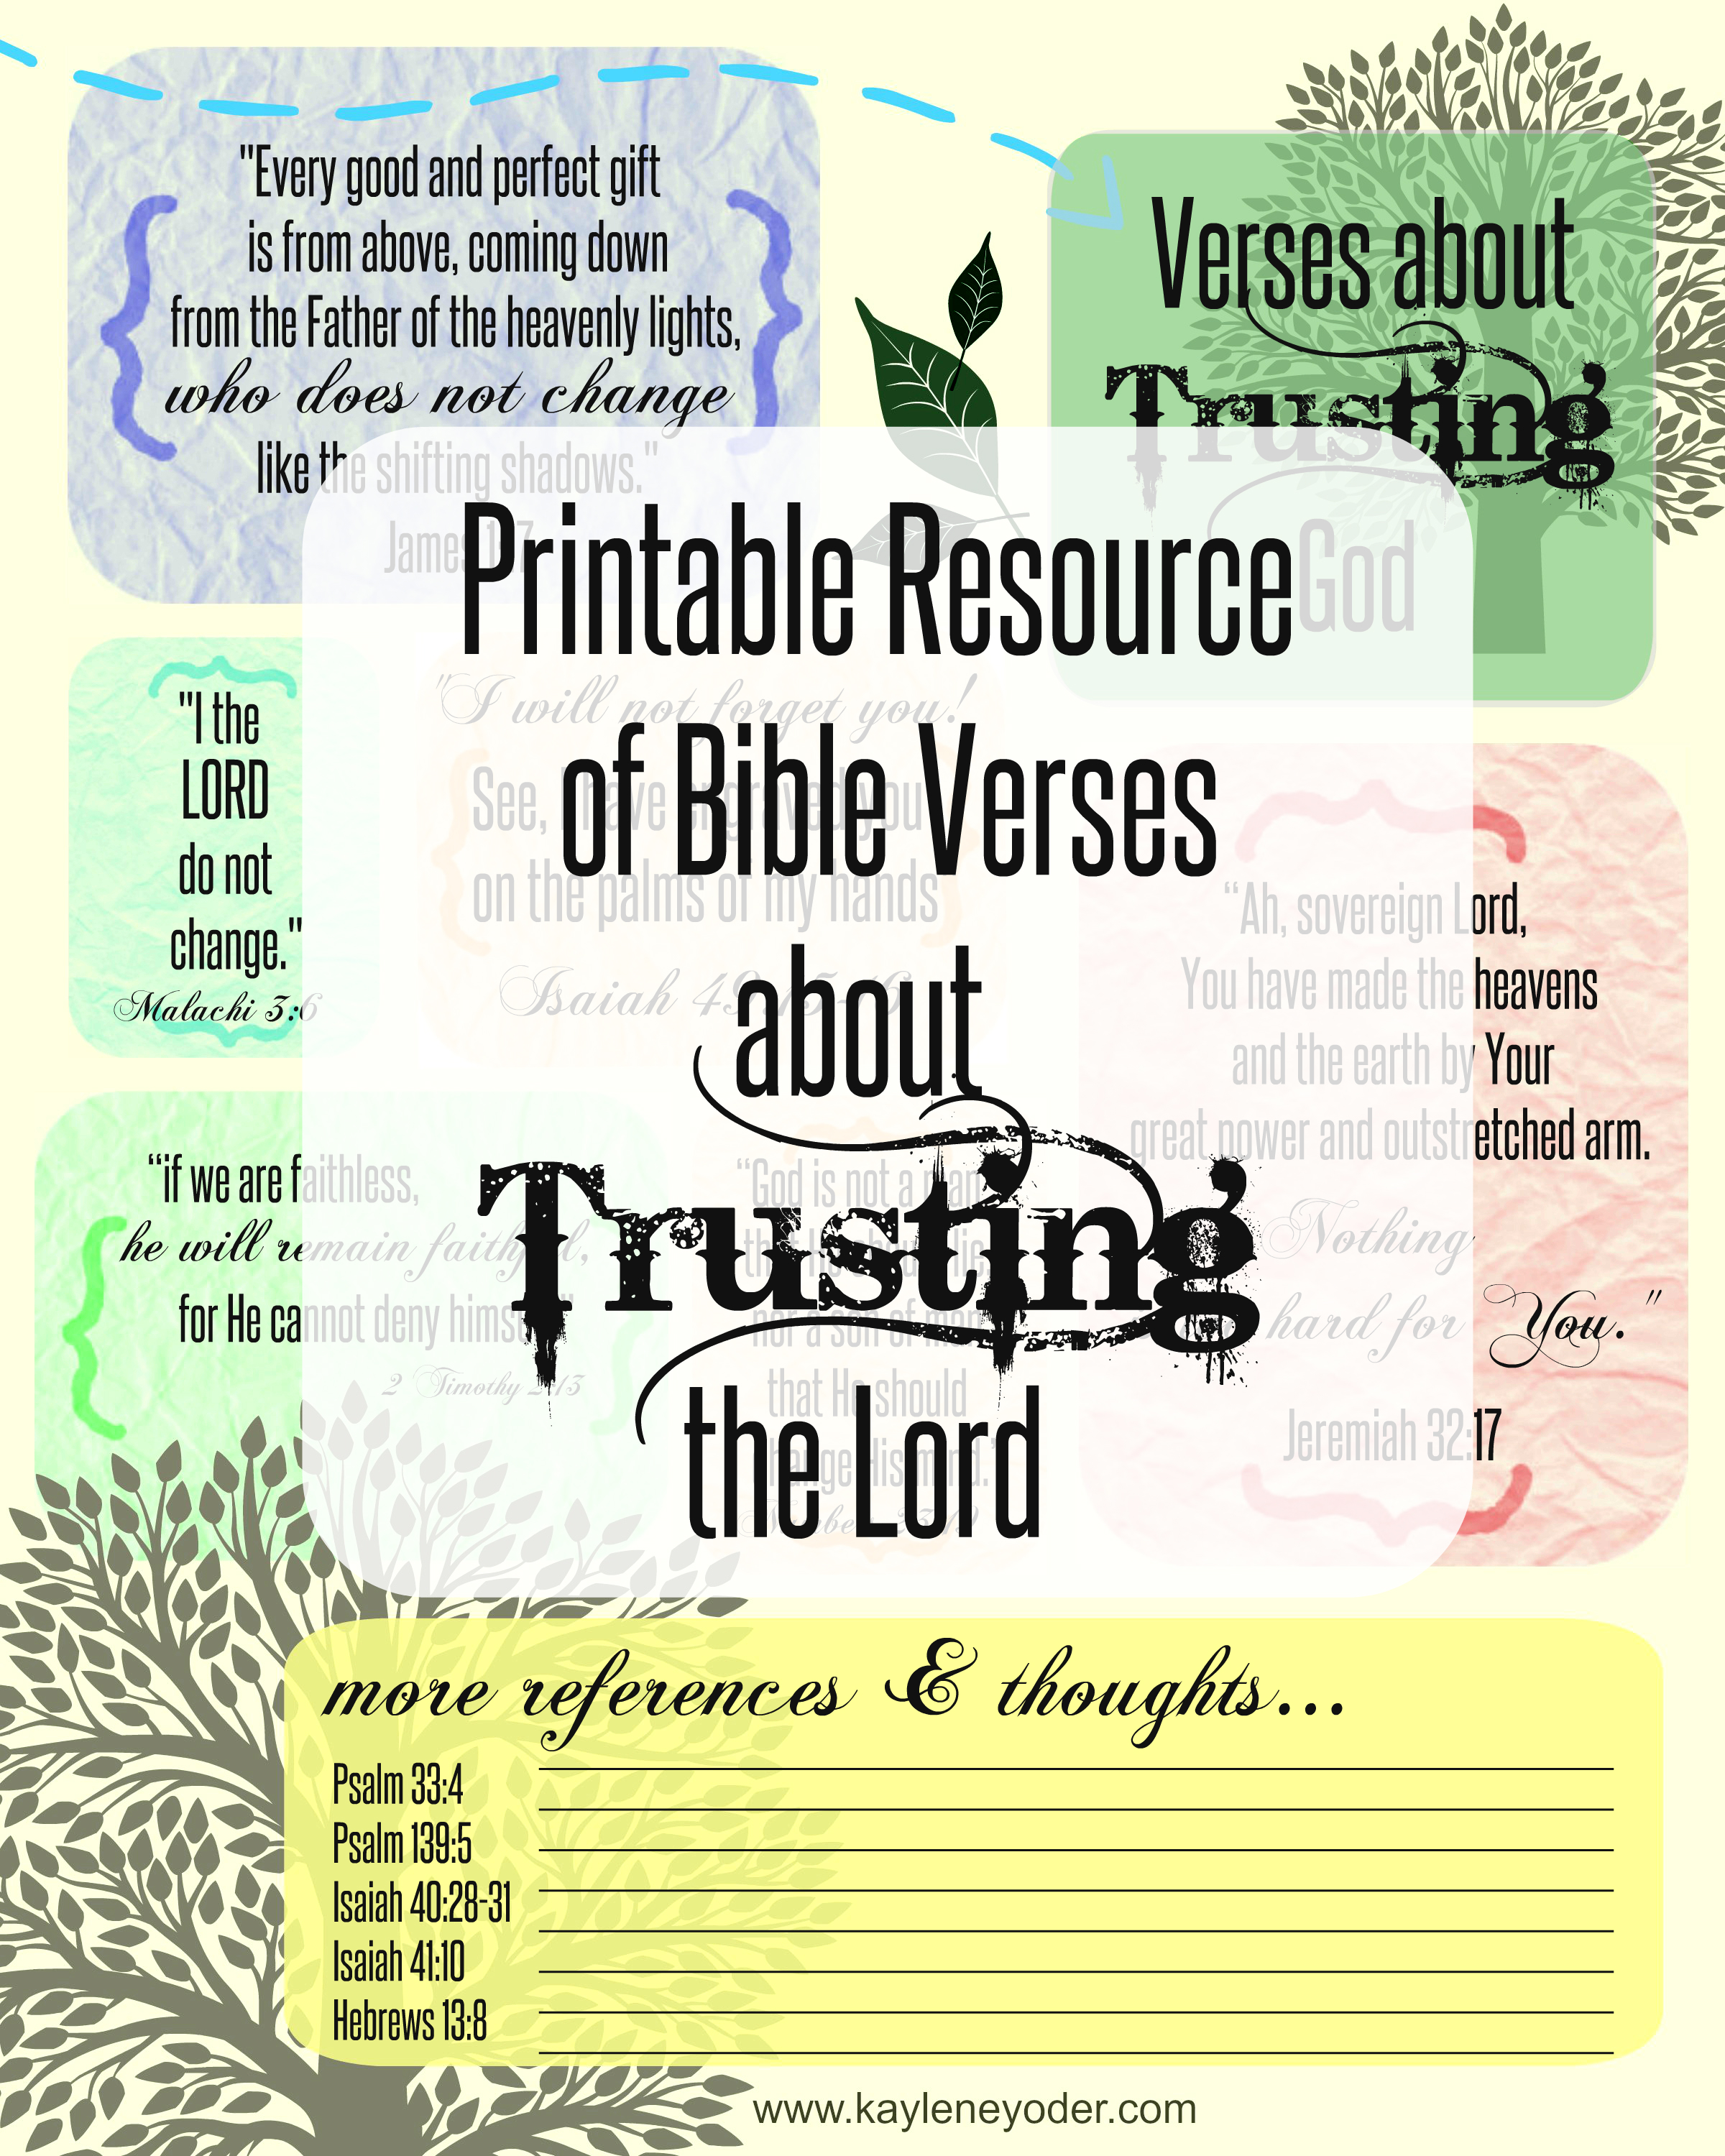 Verses about trusting God title image